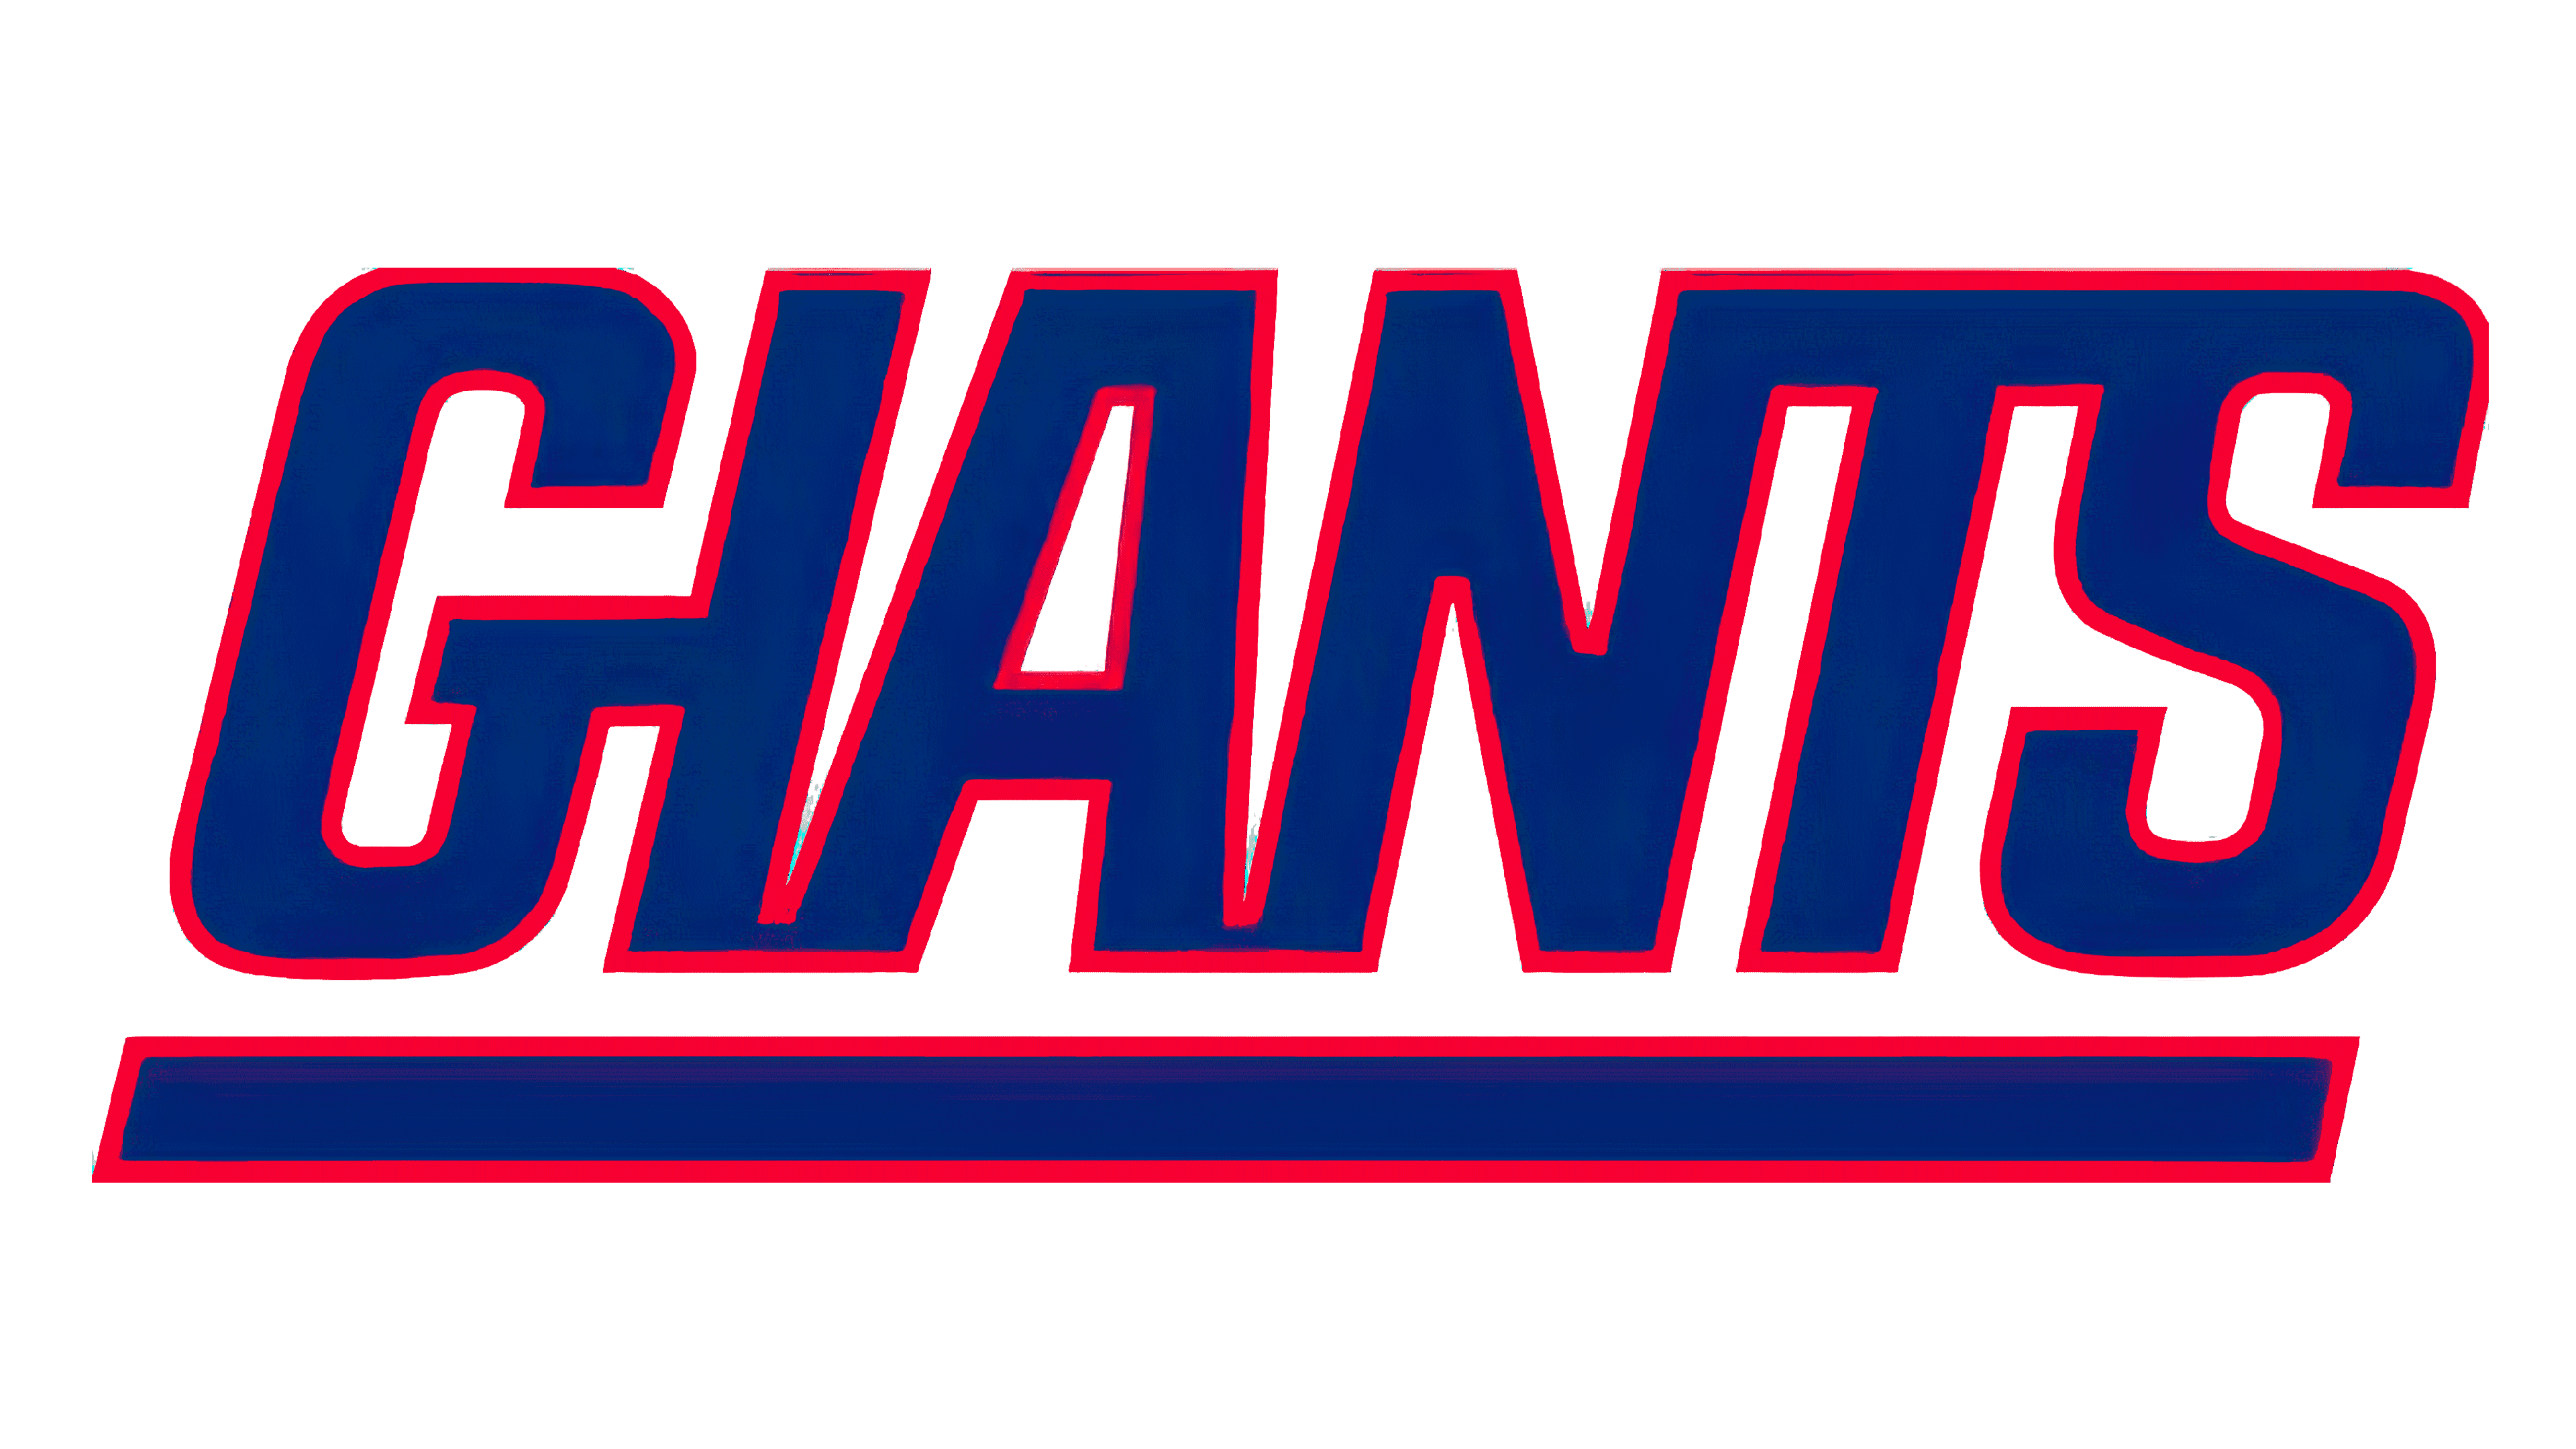 New York Giants Logo and sign, new logo meaning and history, PNG, SVG